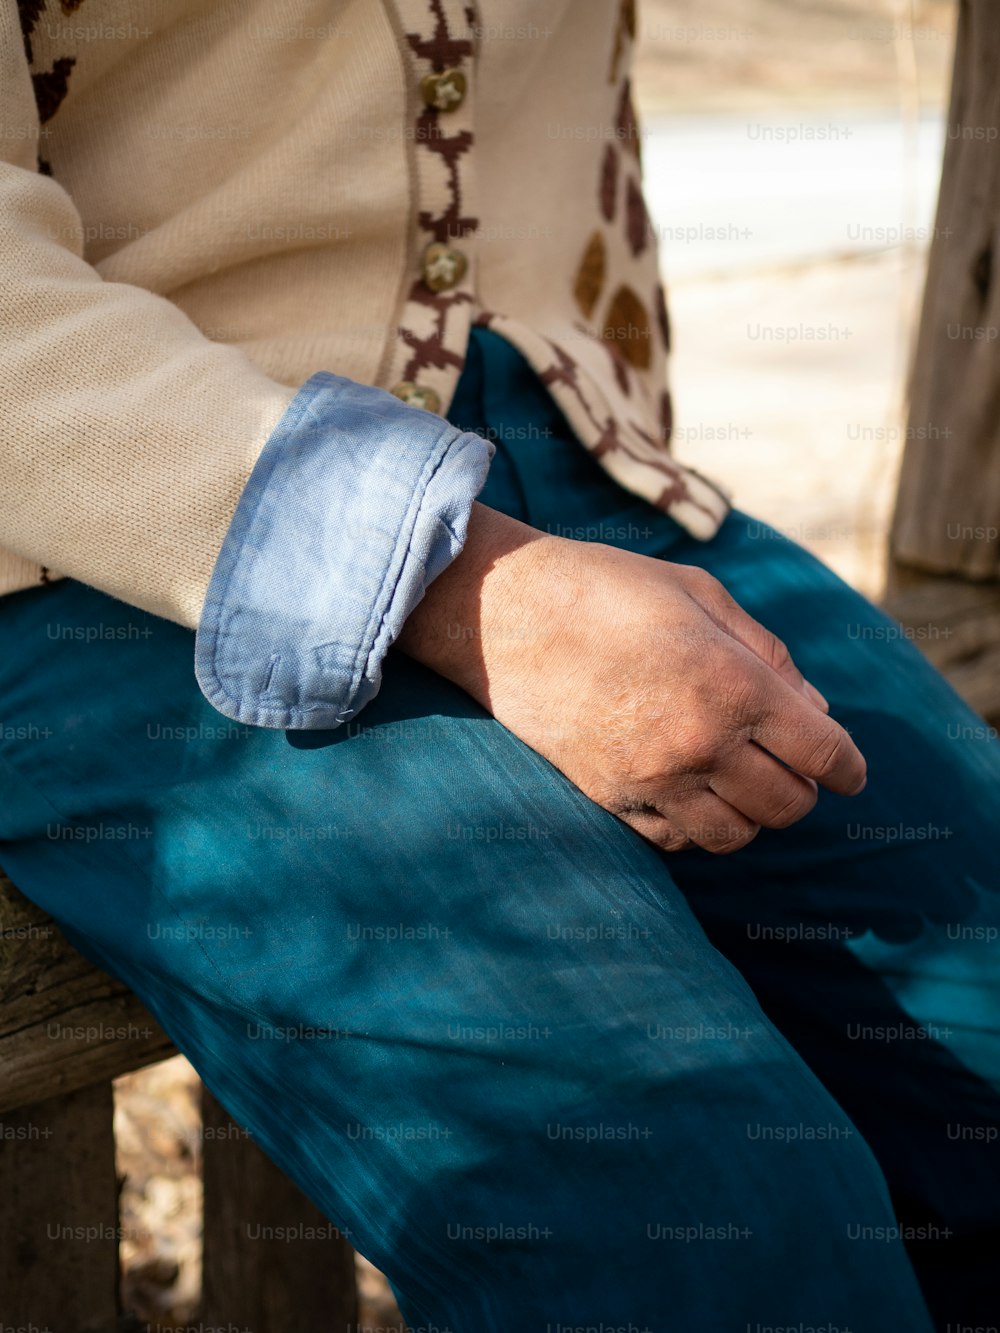 a man is sitting on a bench with his hand on his lap